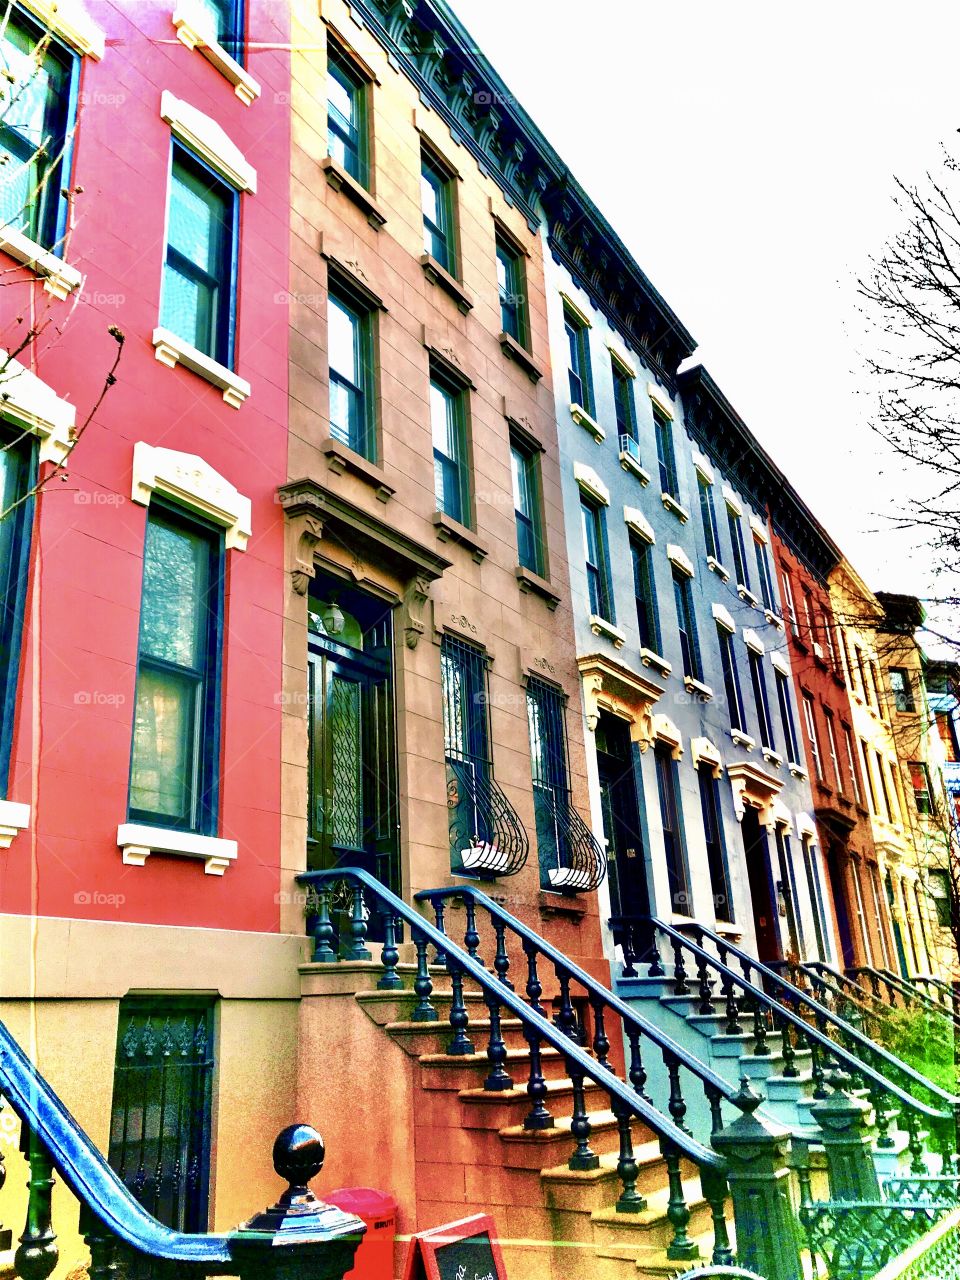 Colorful townhouses in Park slope Brooklyn neighborhood, New York City 